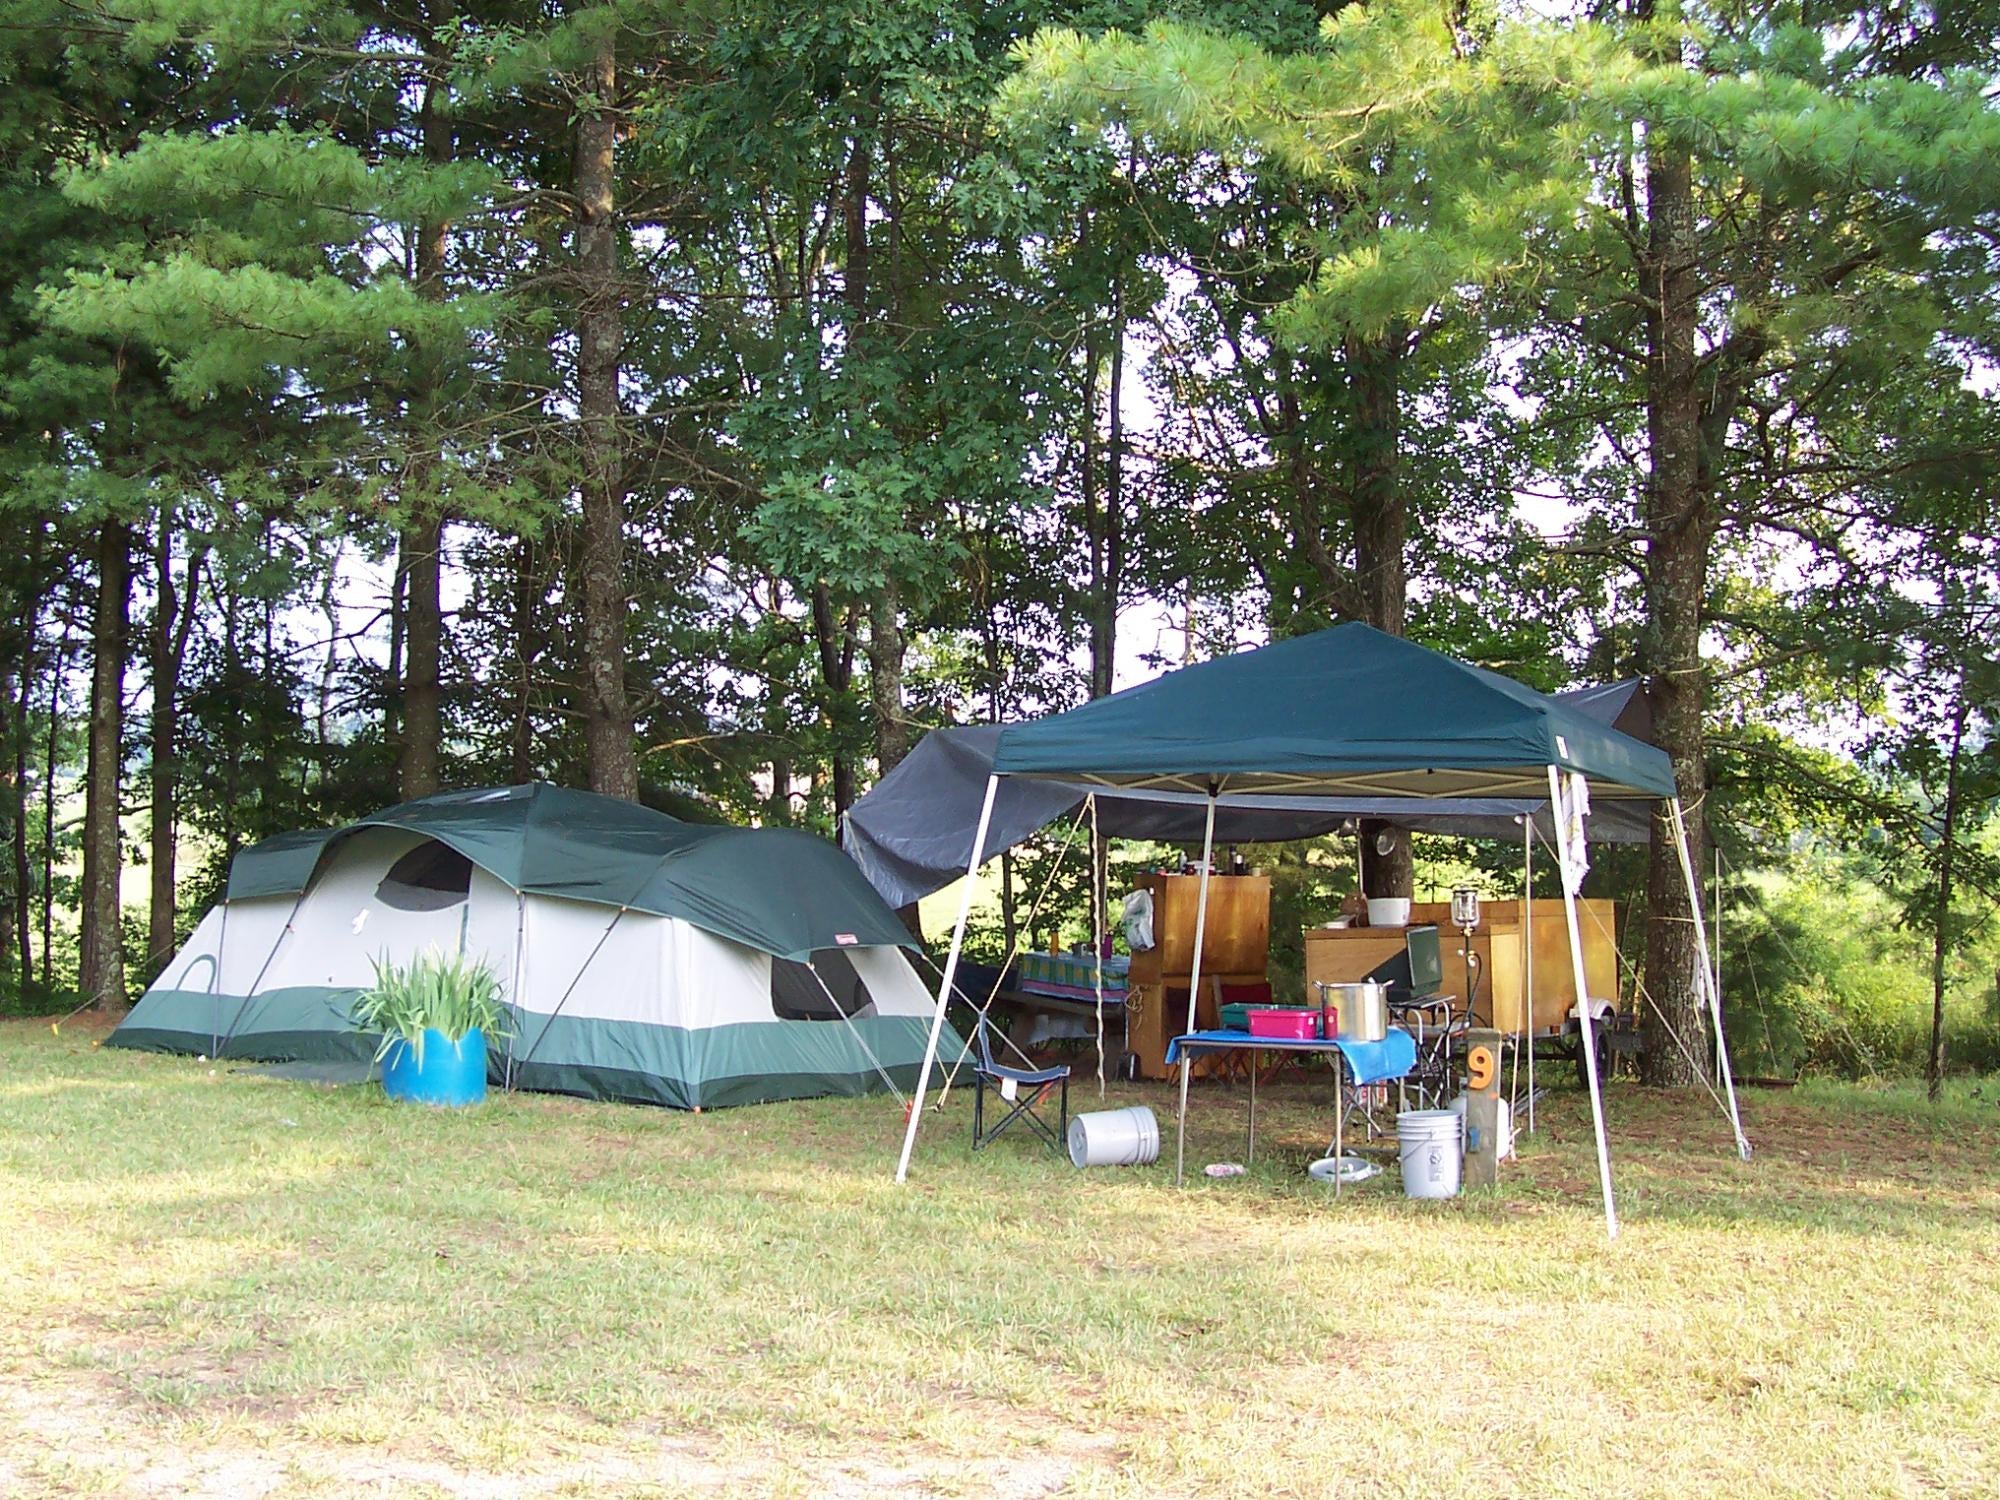 Camper submitted image from Sunrise Campground - Long Term Only as of 2021 - 2